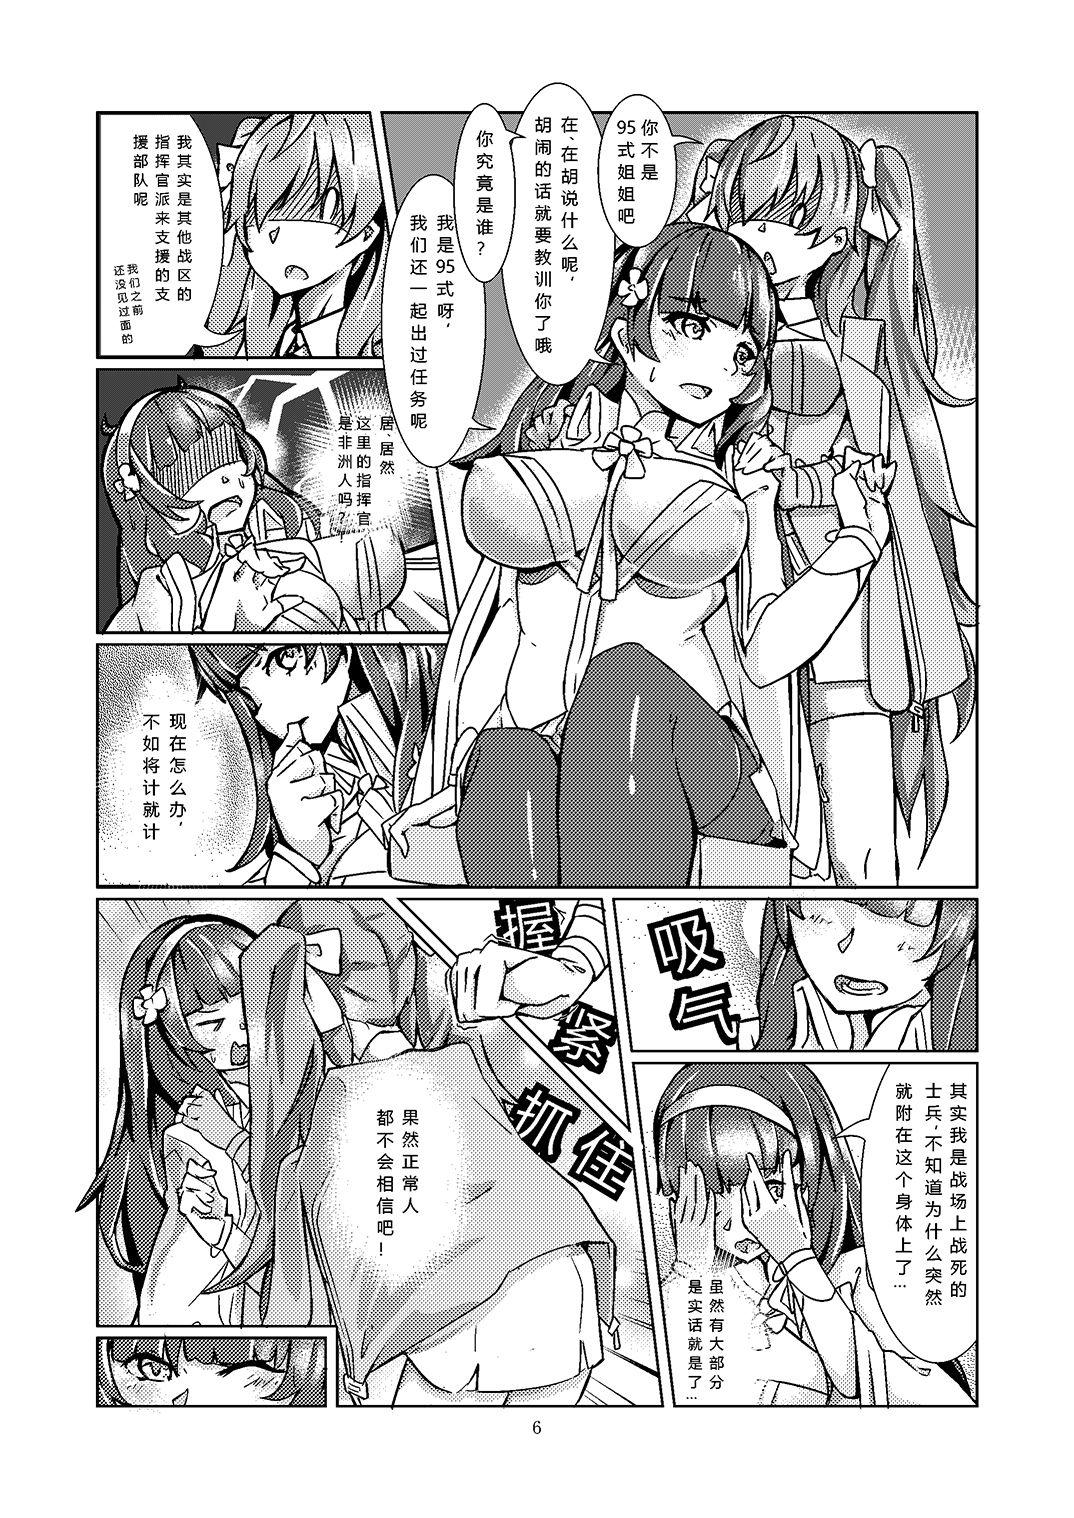 Special Locations 95 - Girls frontline Sesso - Page 8